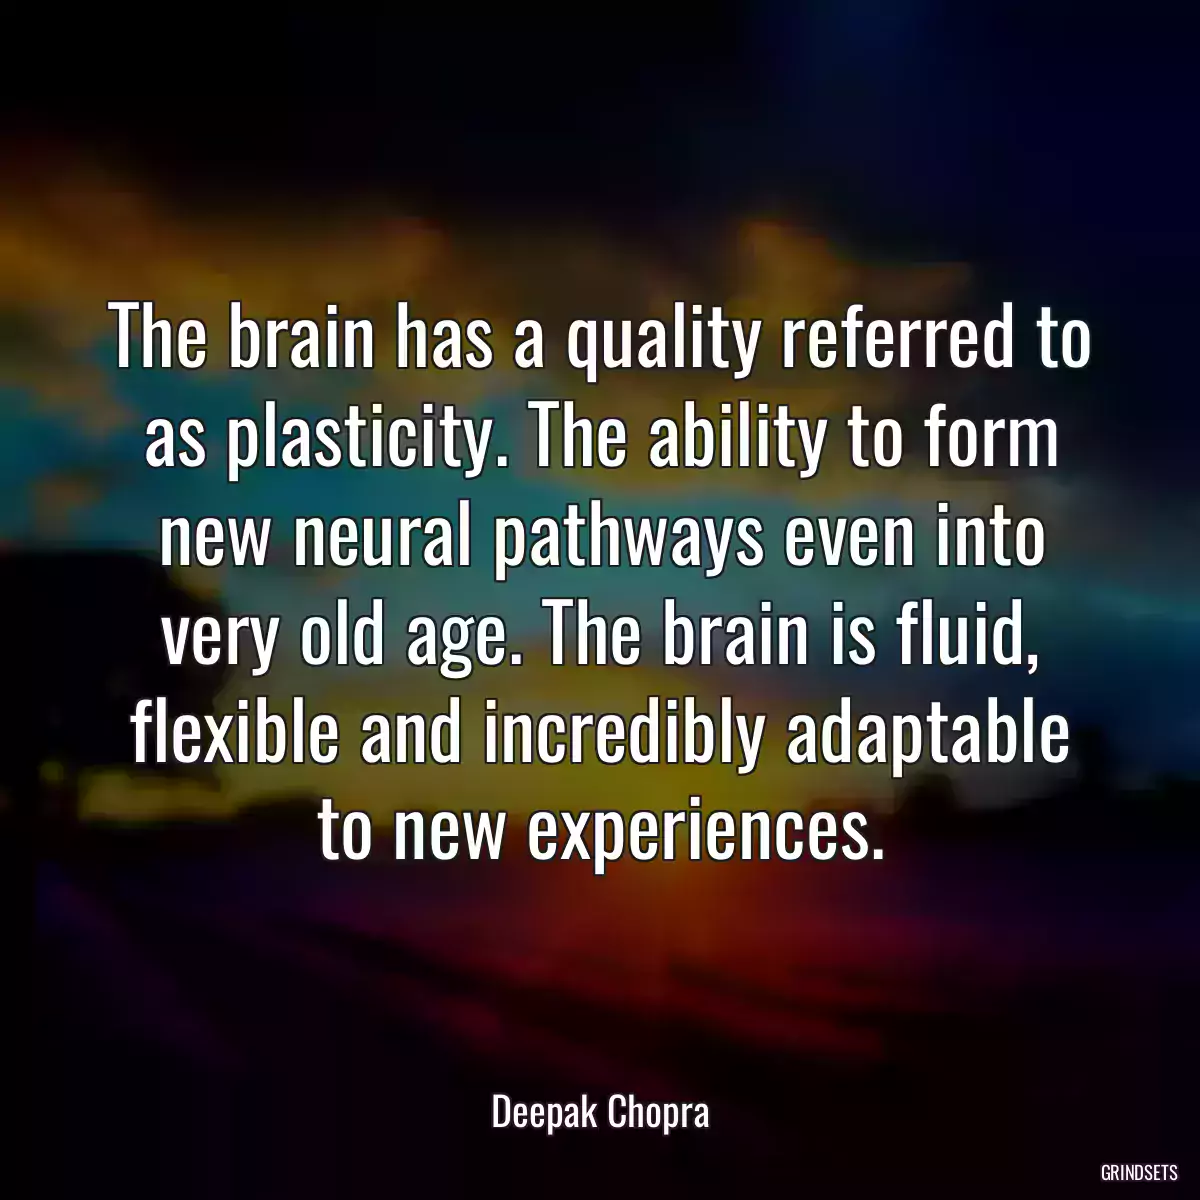 The brain has a quality referred to as plasticity. The ability to form new neural pathways even into very old age. The brain is fluid, flexible and incredibly adaptable to new experiences.